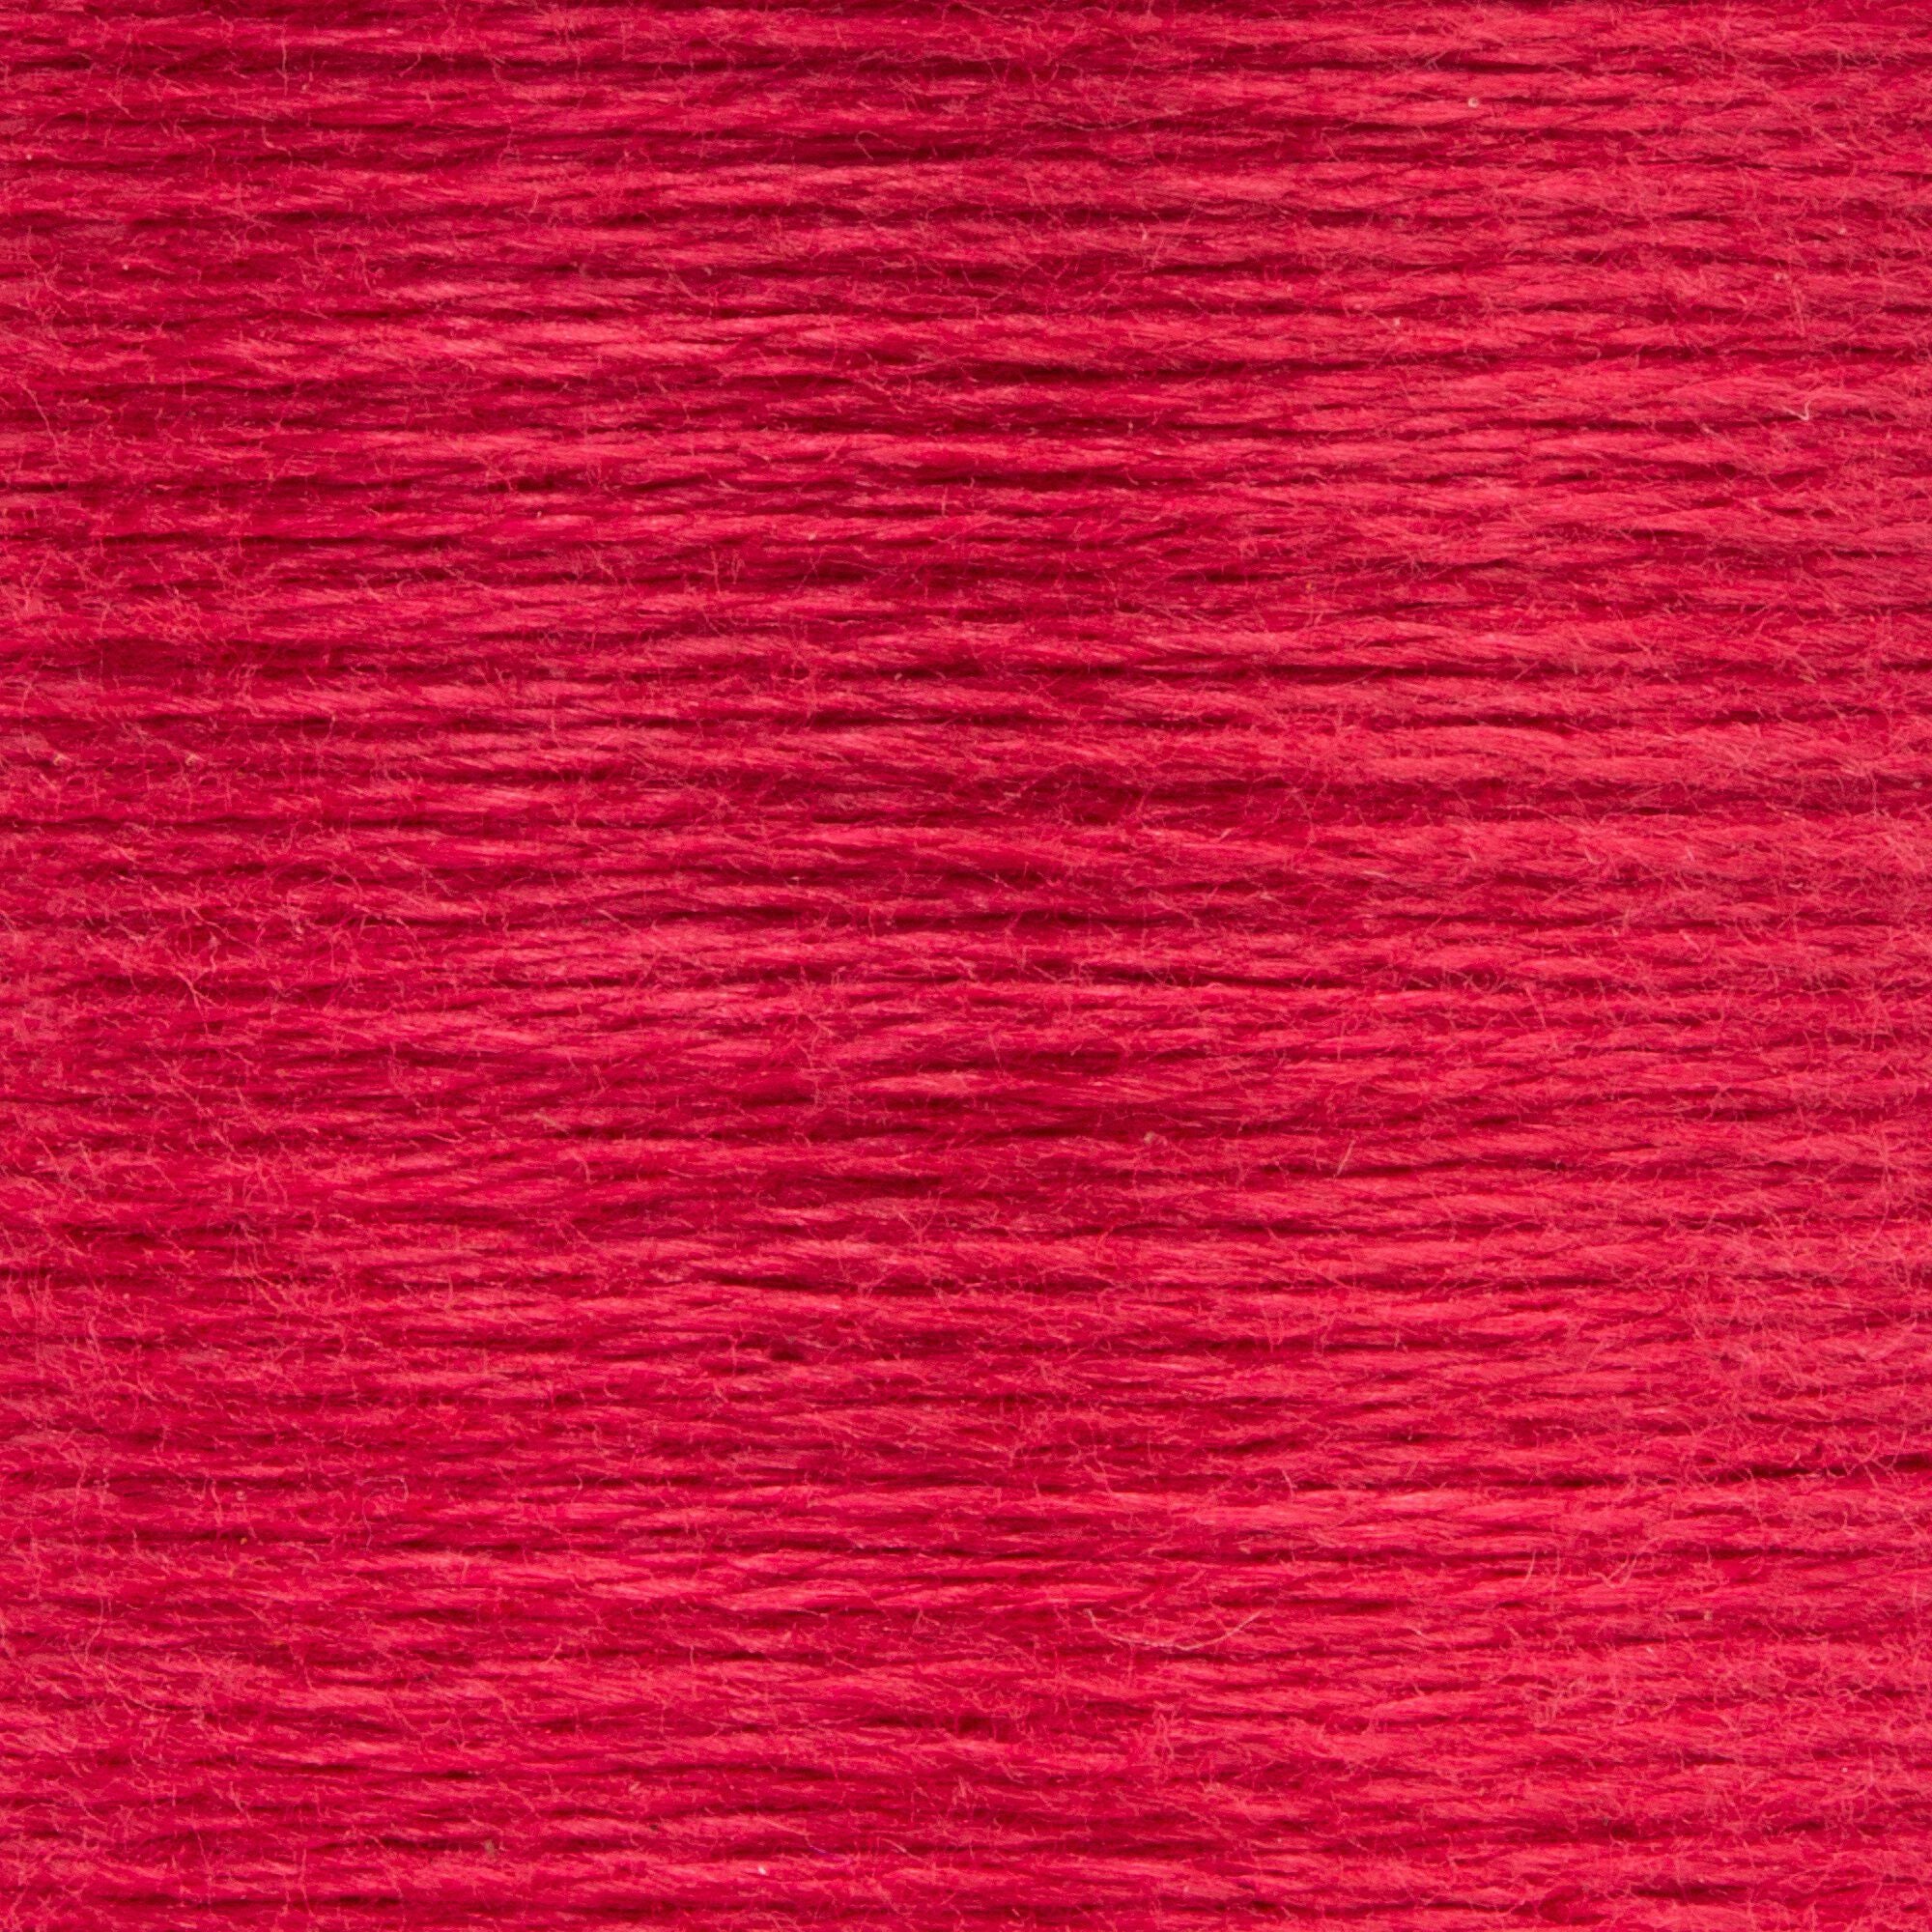 Anchor Embroidery Floss in Carmine Rose Med